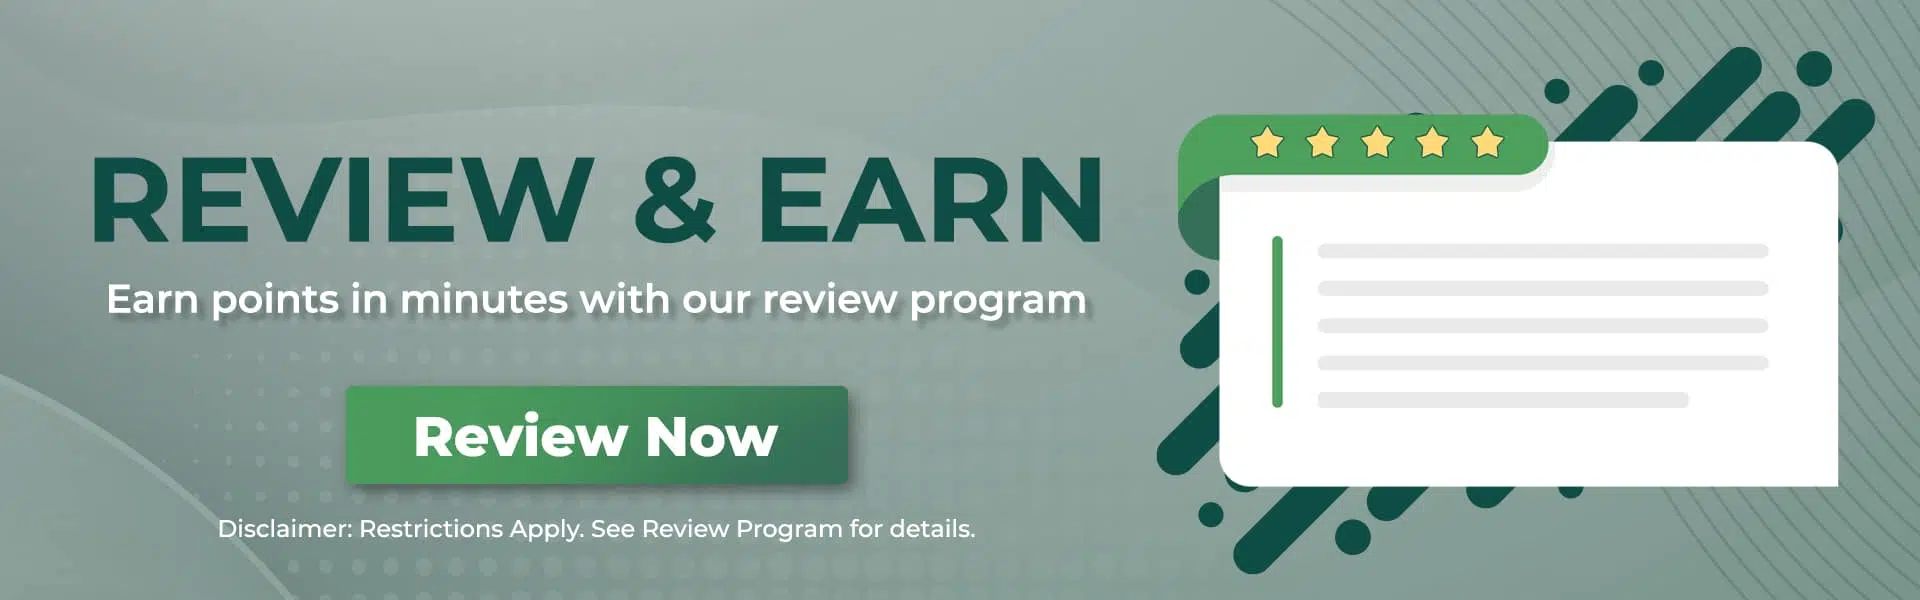 Pacific grass review program